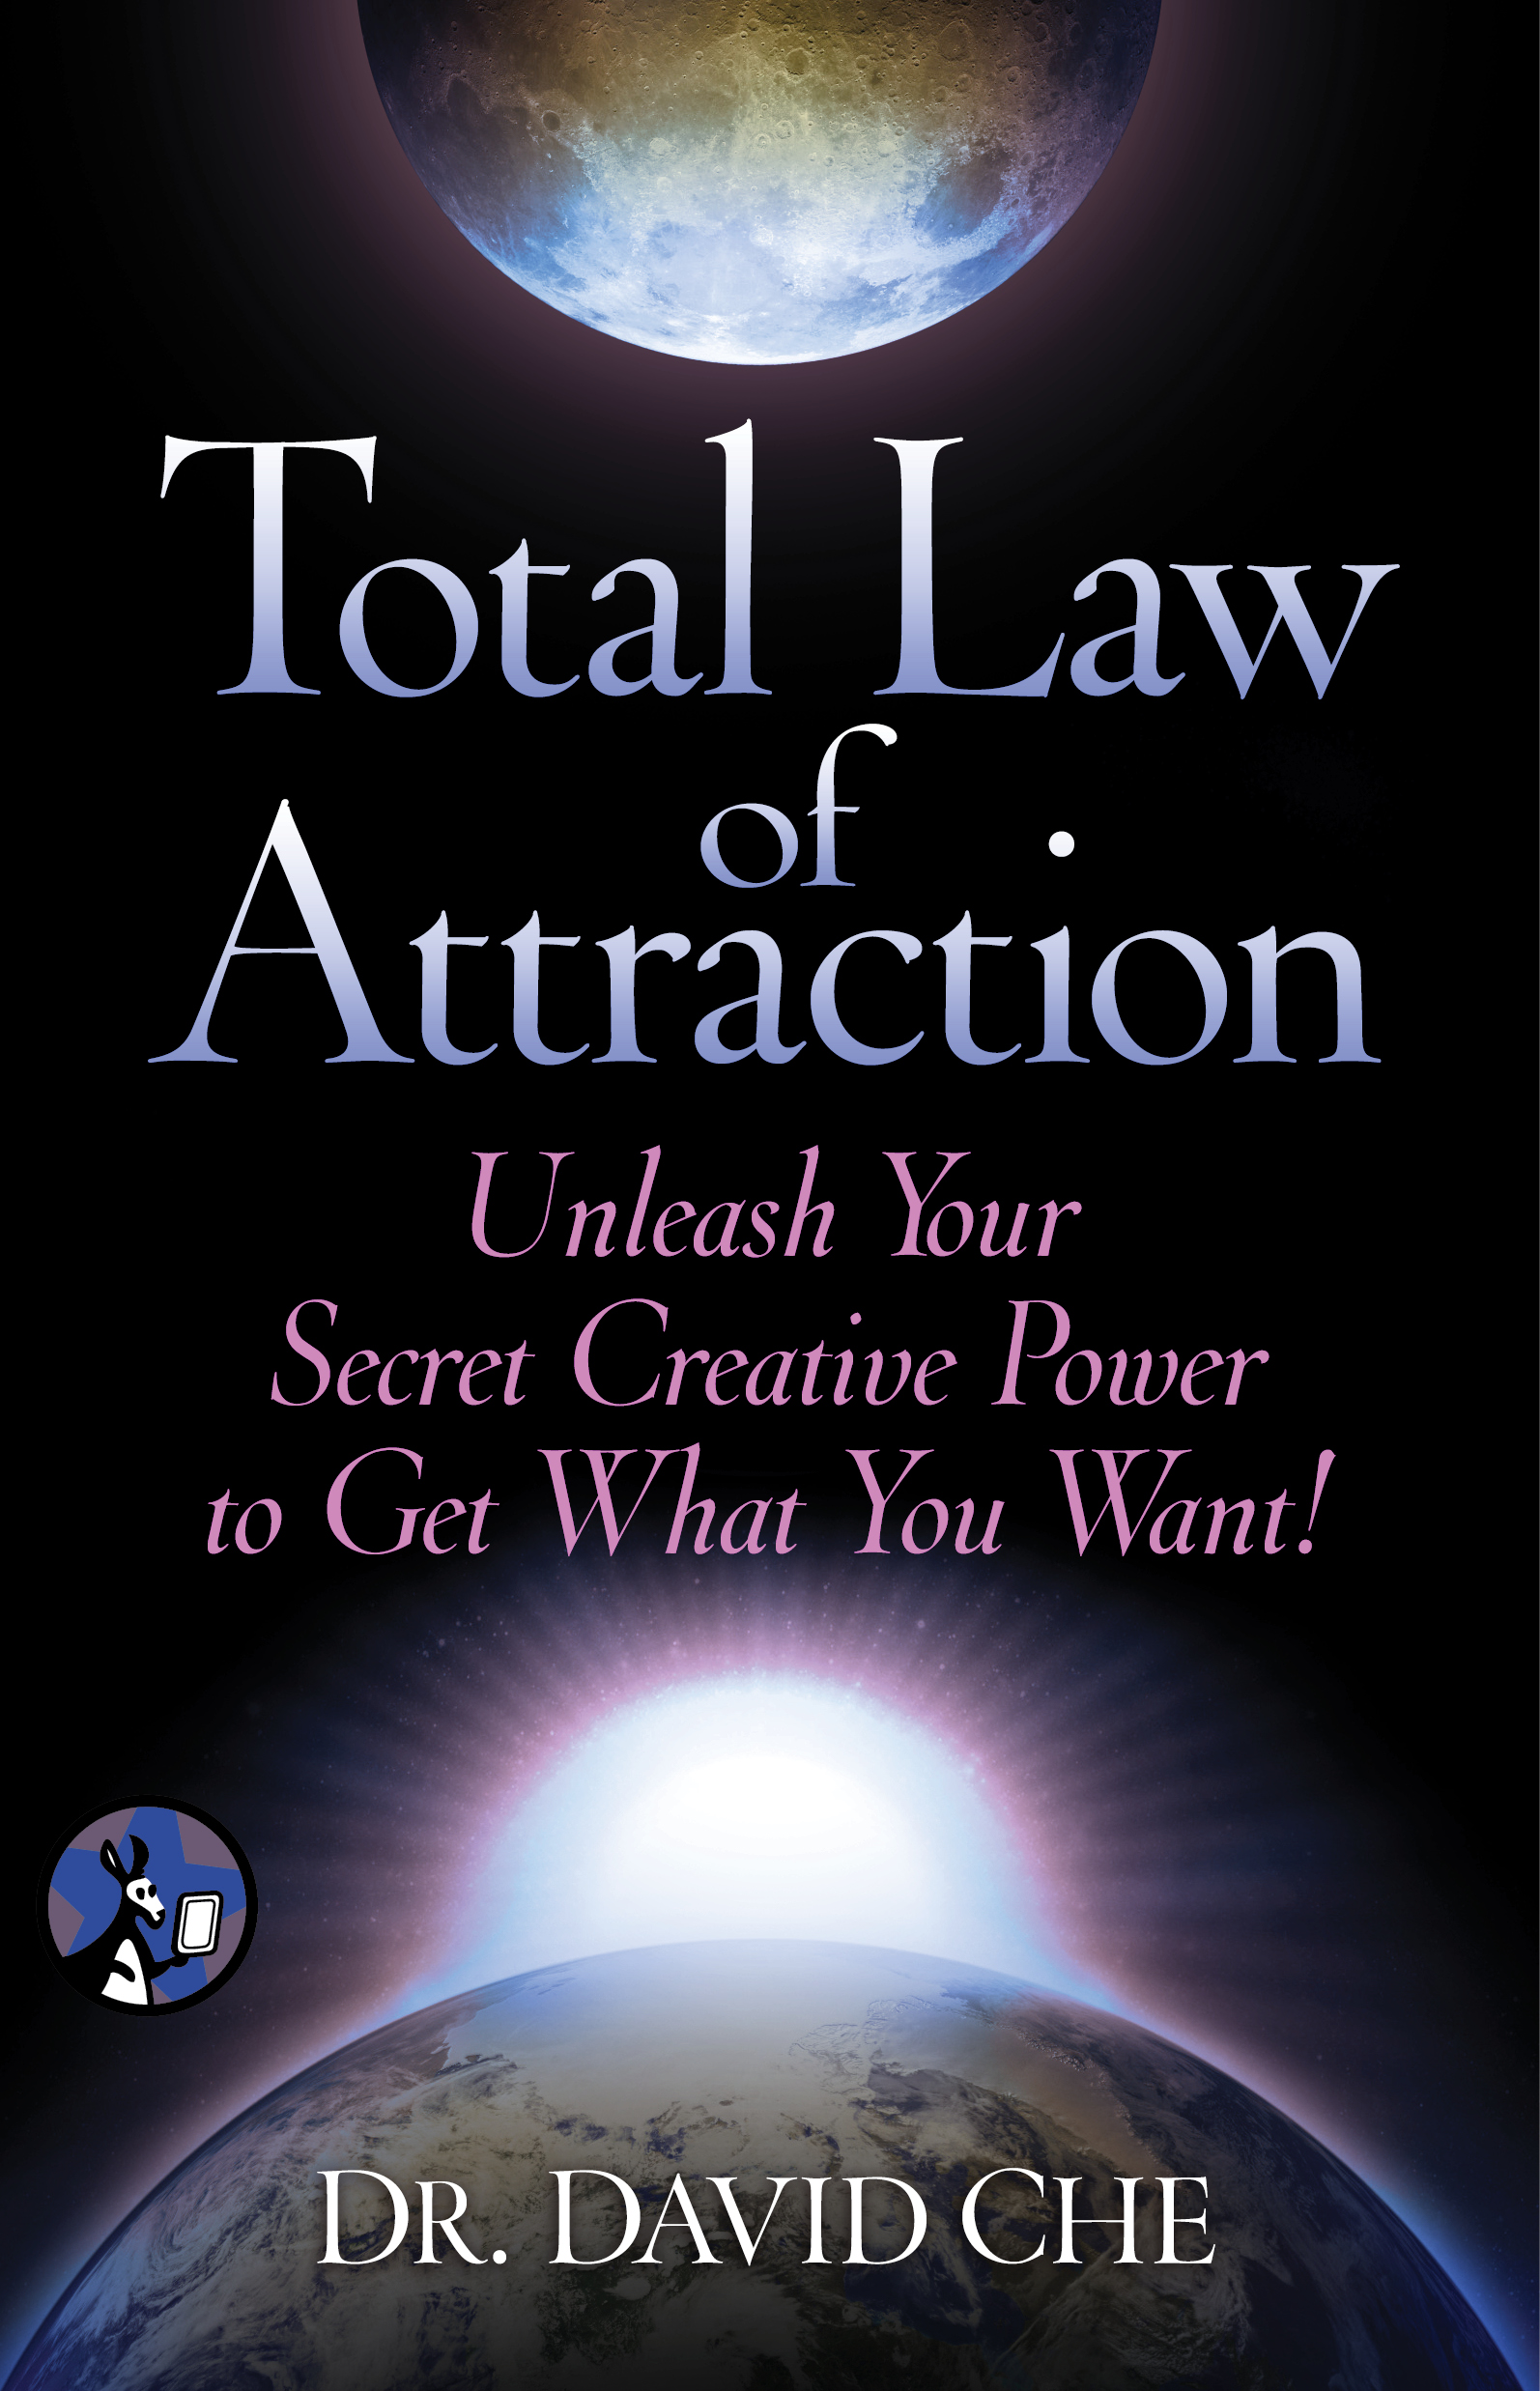 17 attraction triggers pdf free